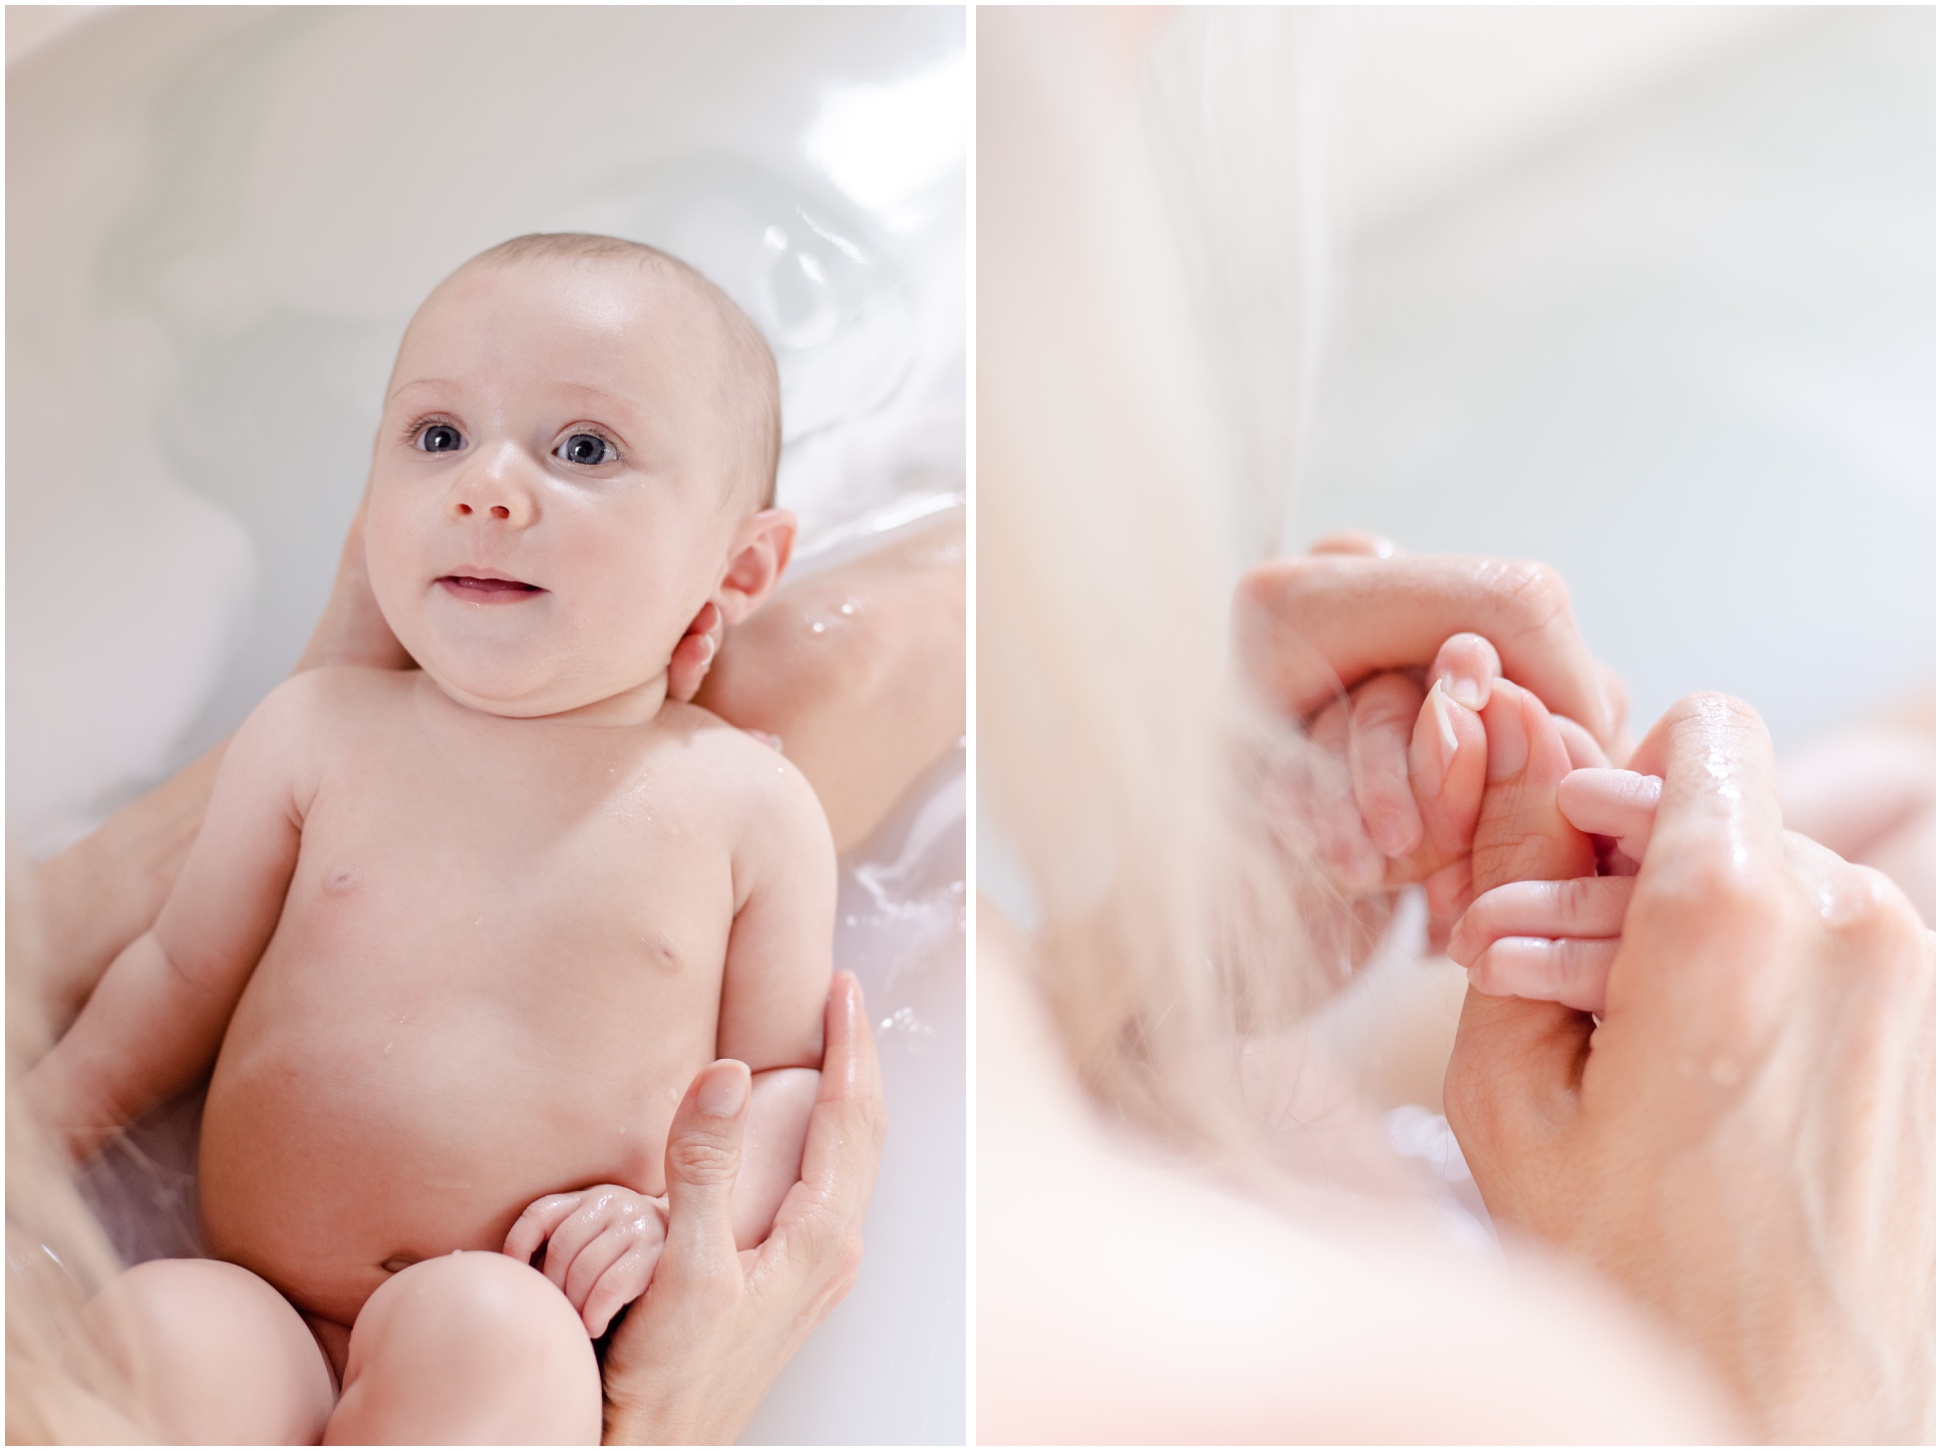 Left Lily in a milk bath, Right, Close up of Rebecca holding Lily's hands in the bathtub